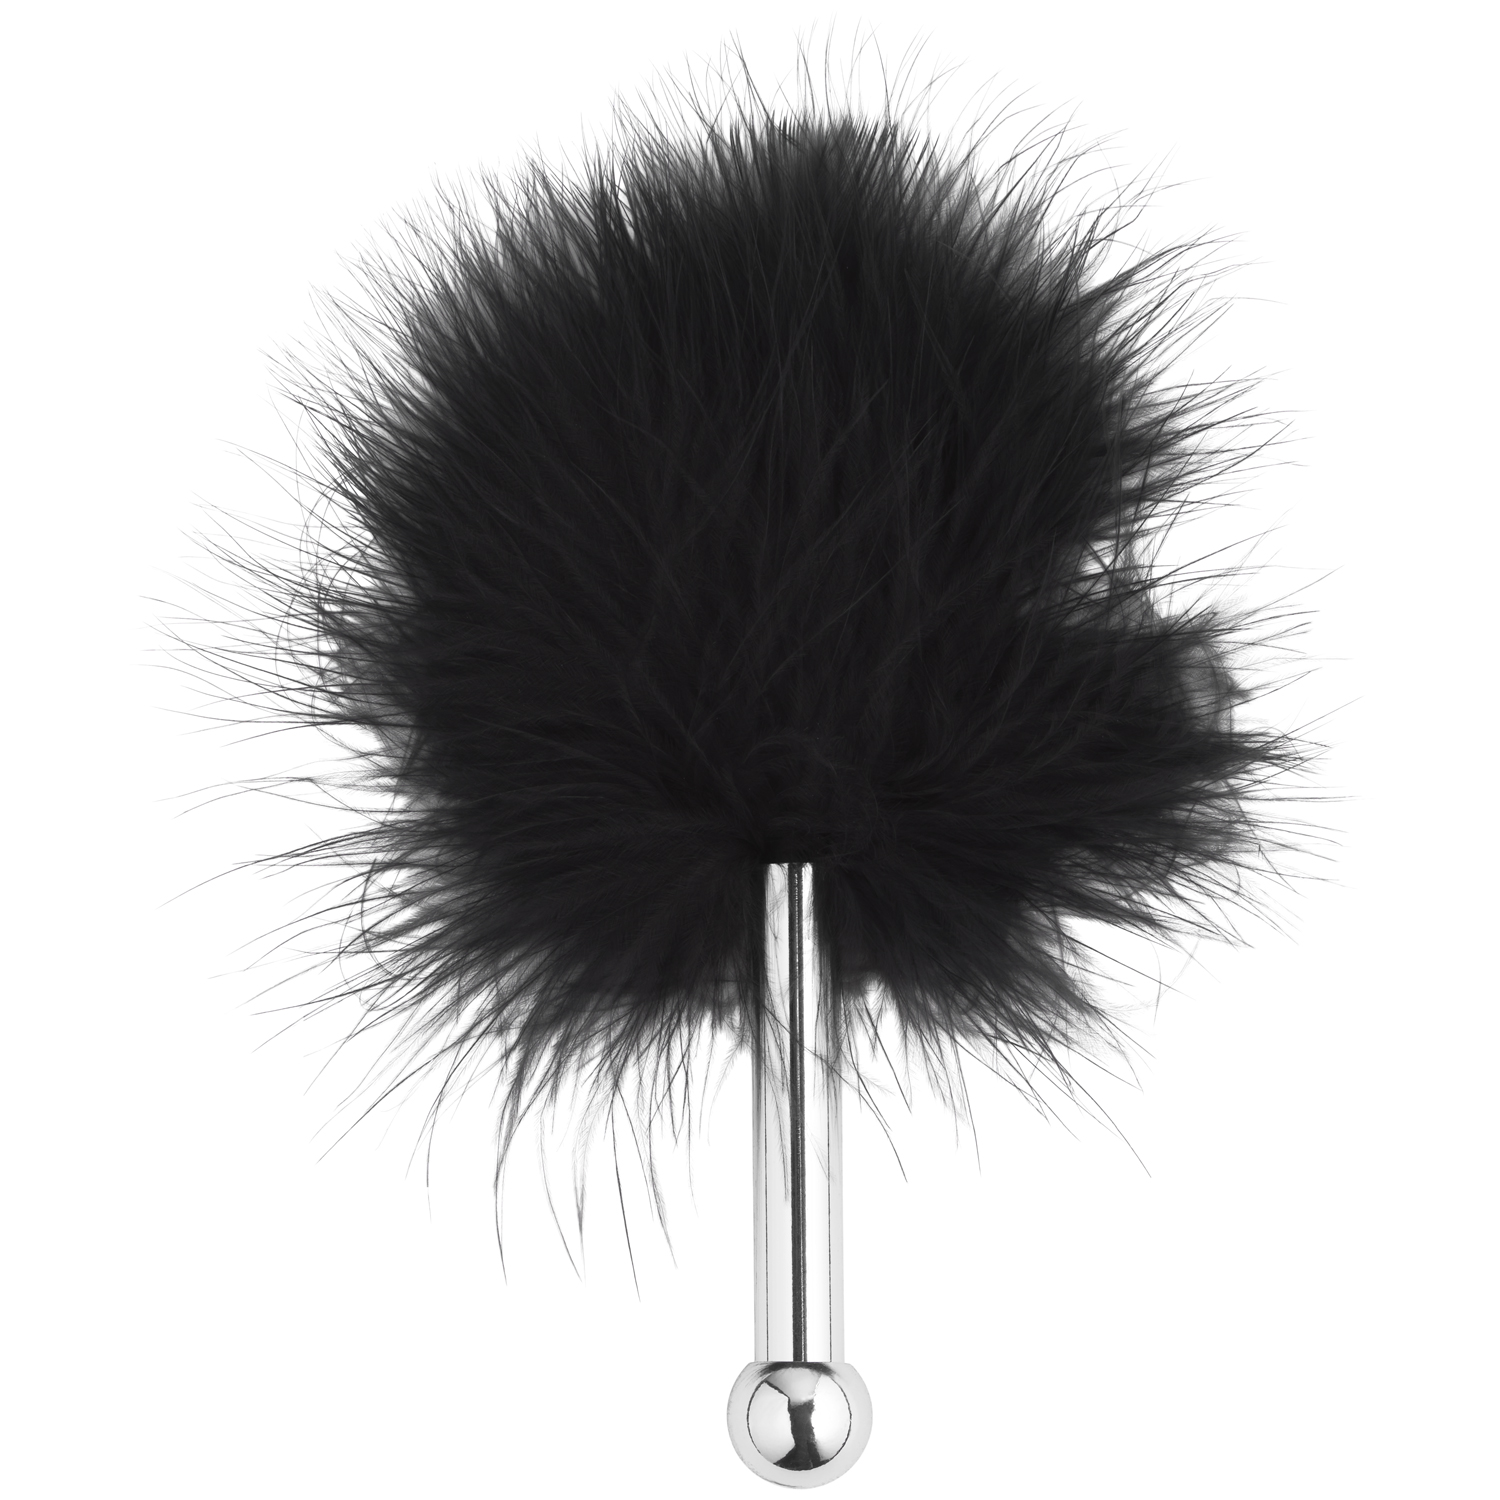 Sinful Tease Feather Silver Tickler - Black thumbnail